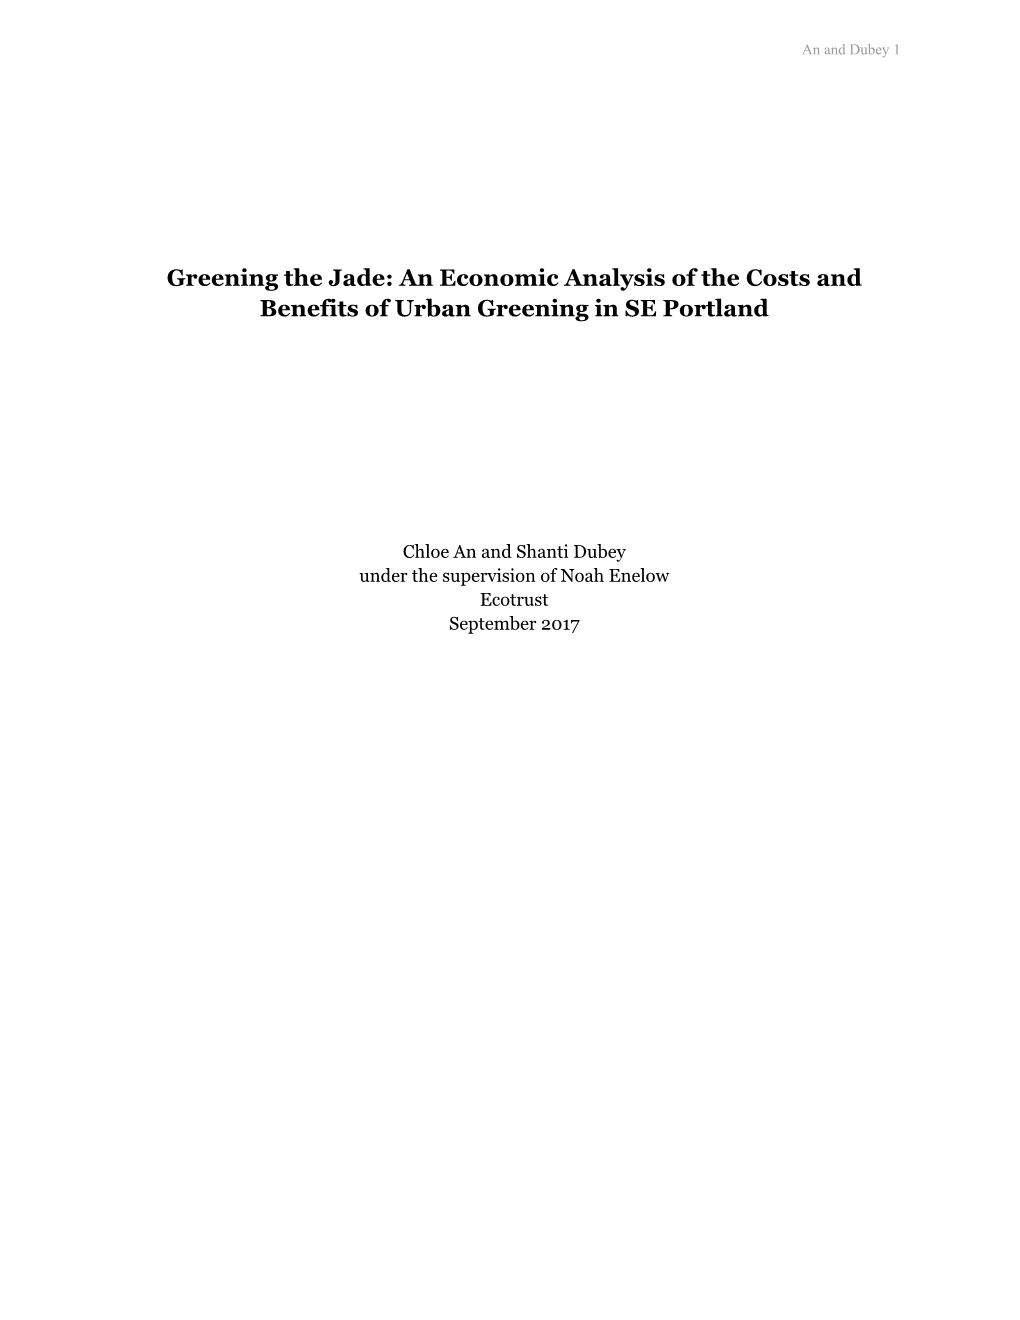 Greening the Jade: an Economic Analysis of the Costs and Benefits of Urban Greening in SE Portland